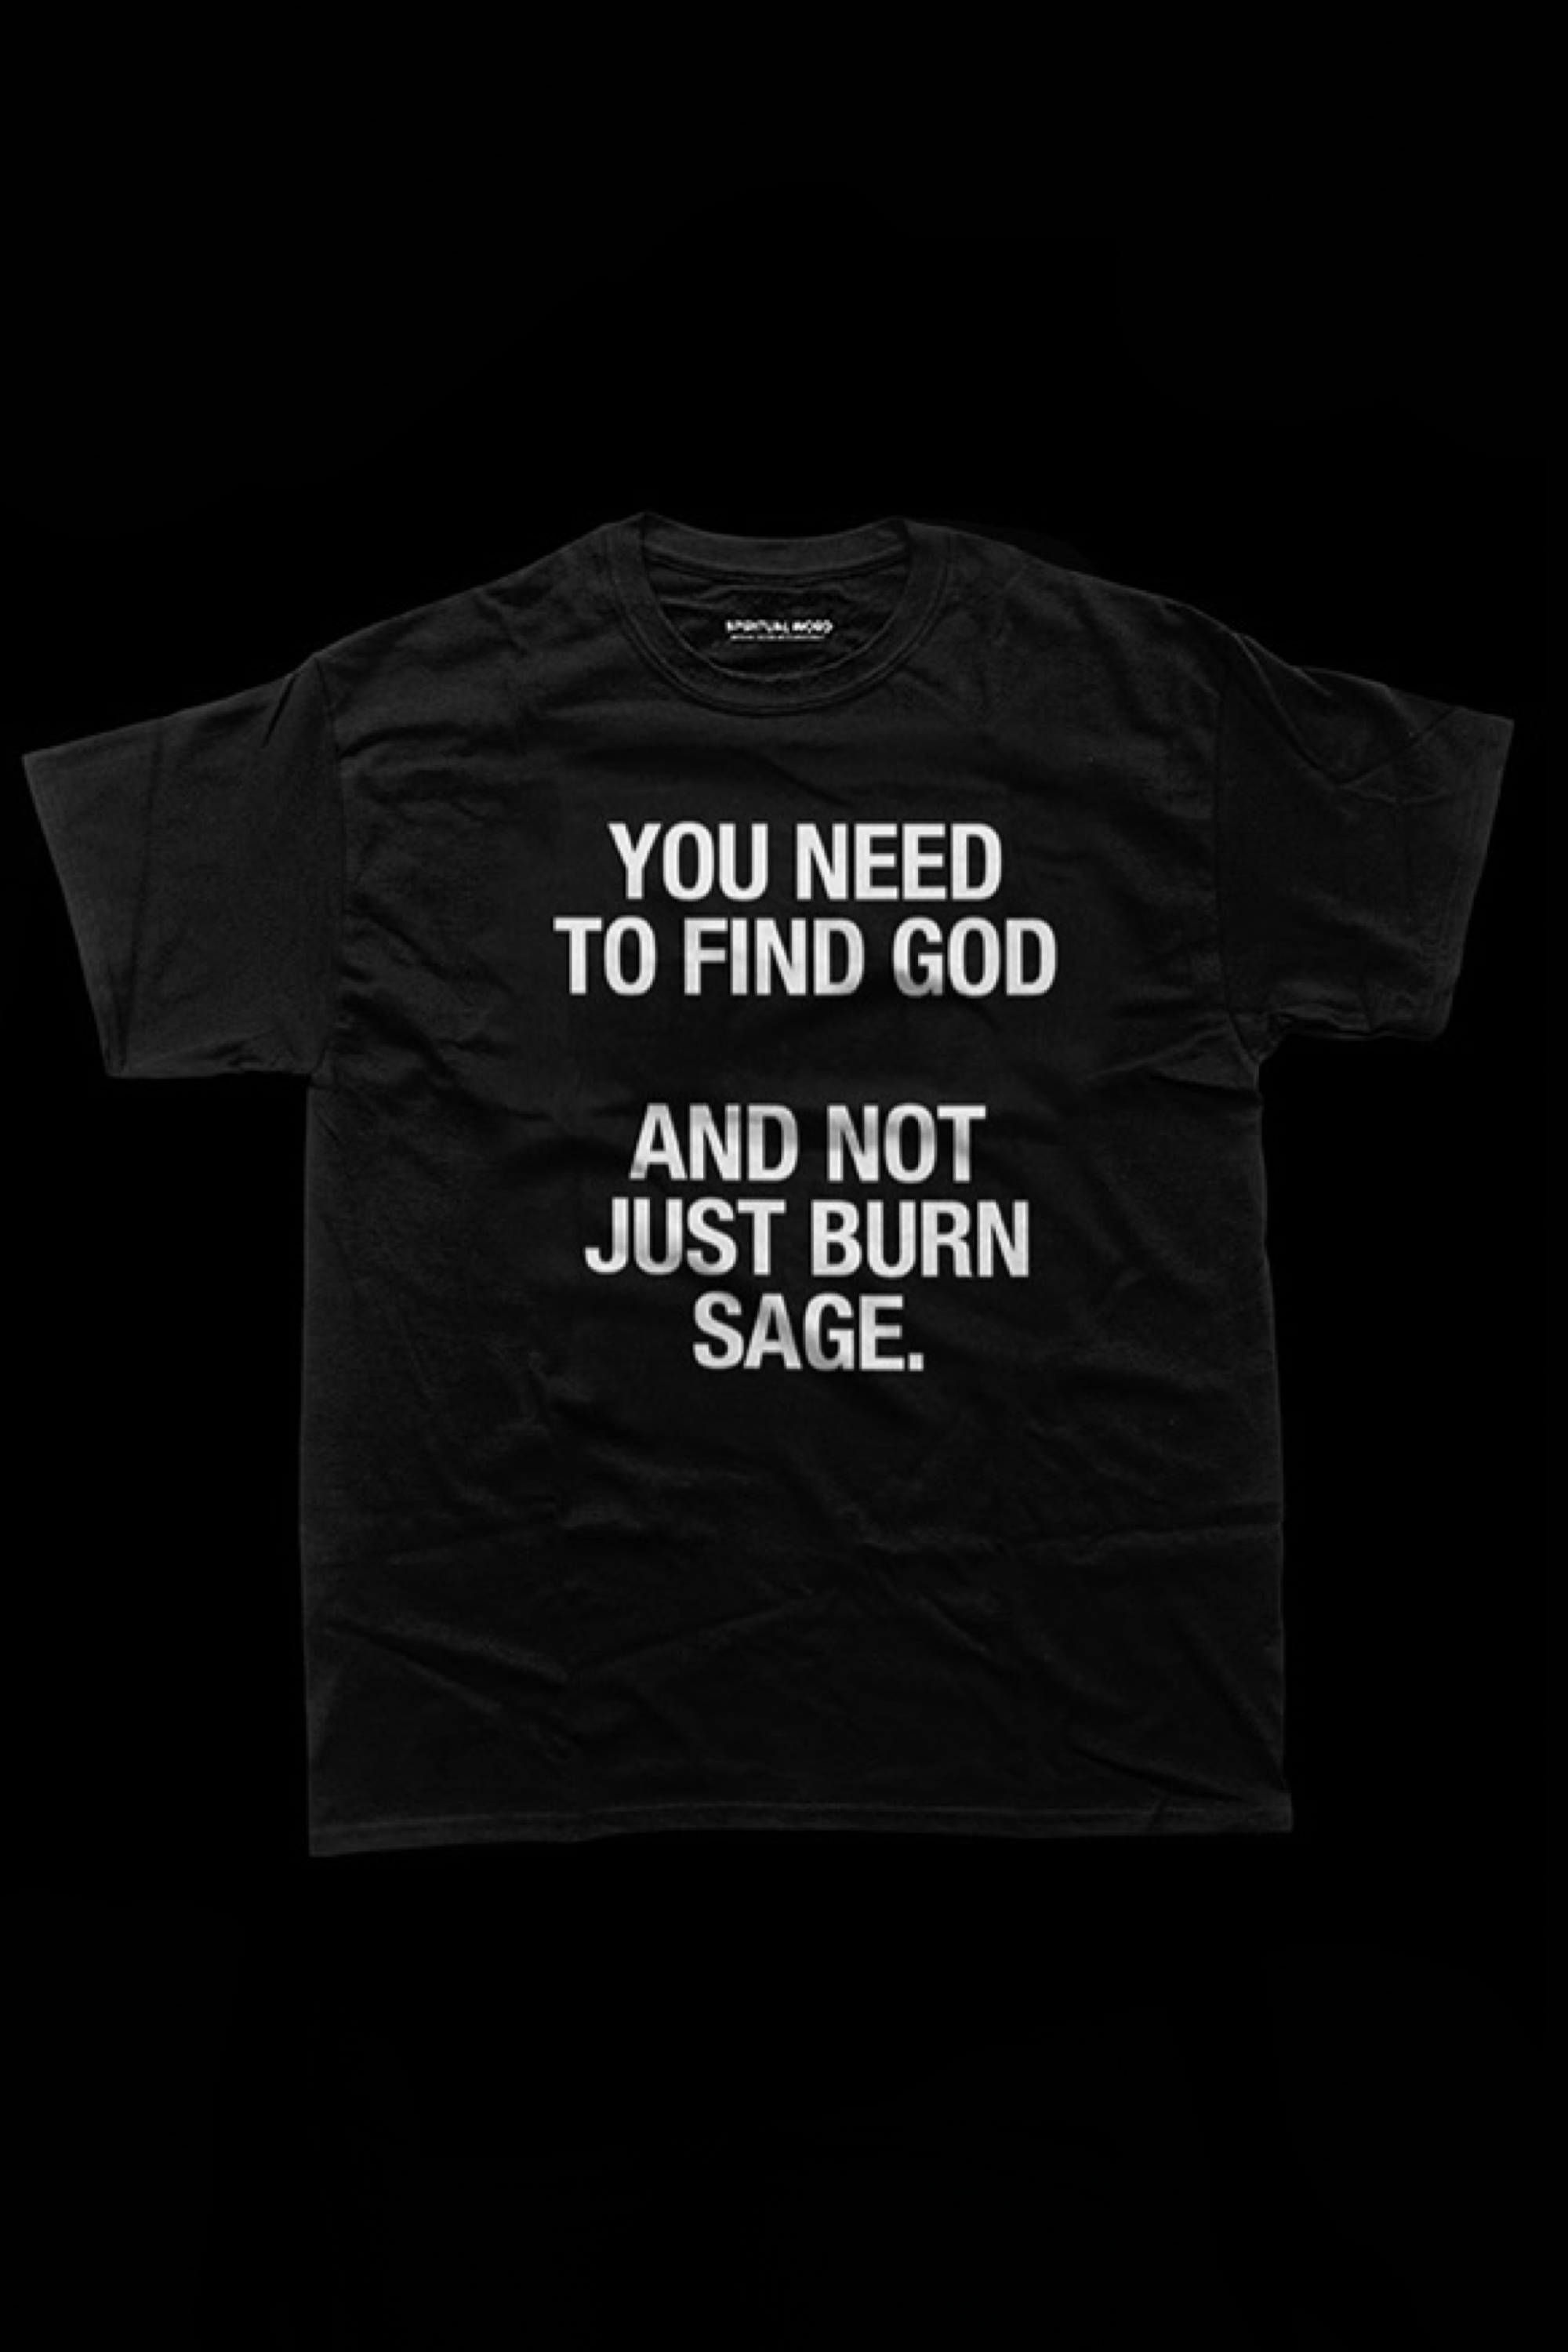 "YOU NEED TO FIND GOD" T-SHIRT